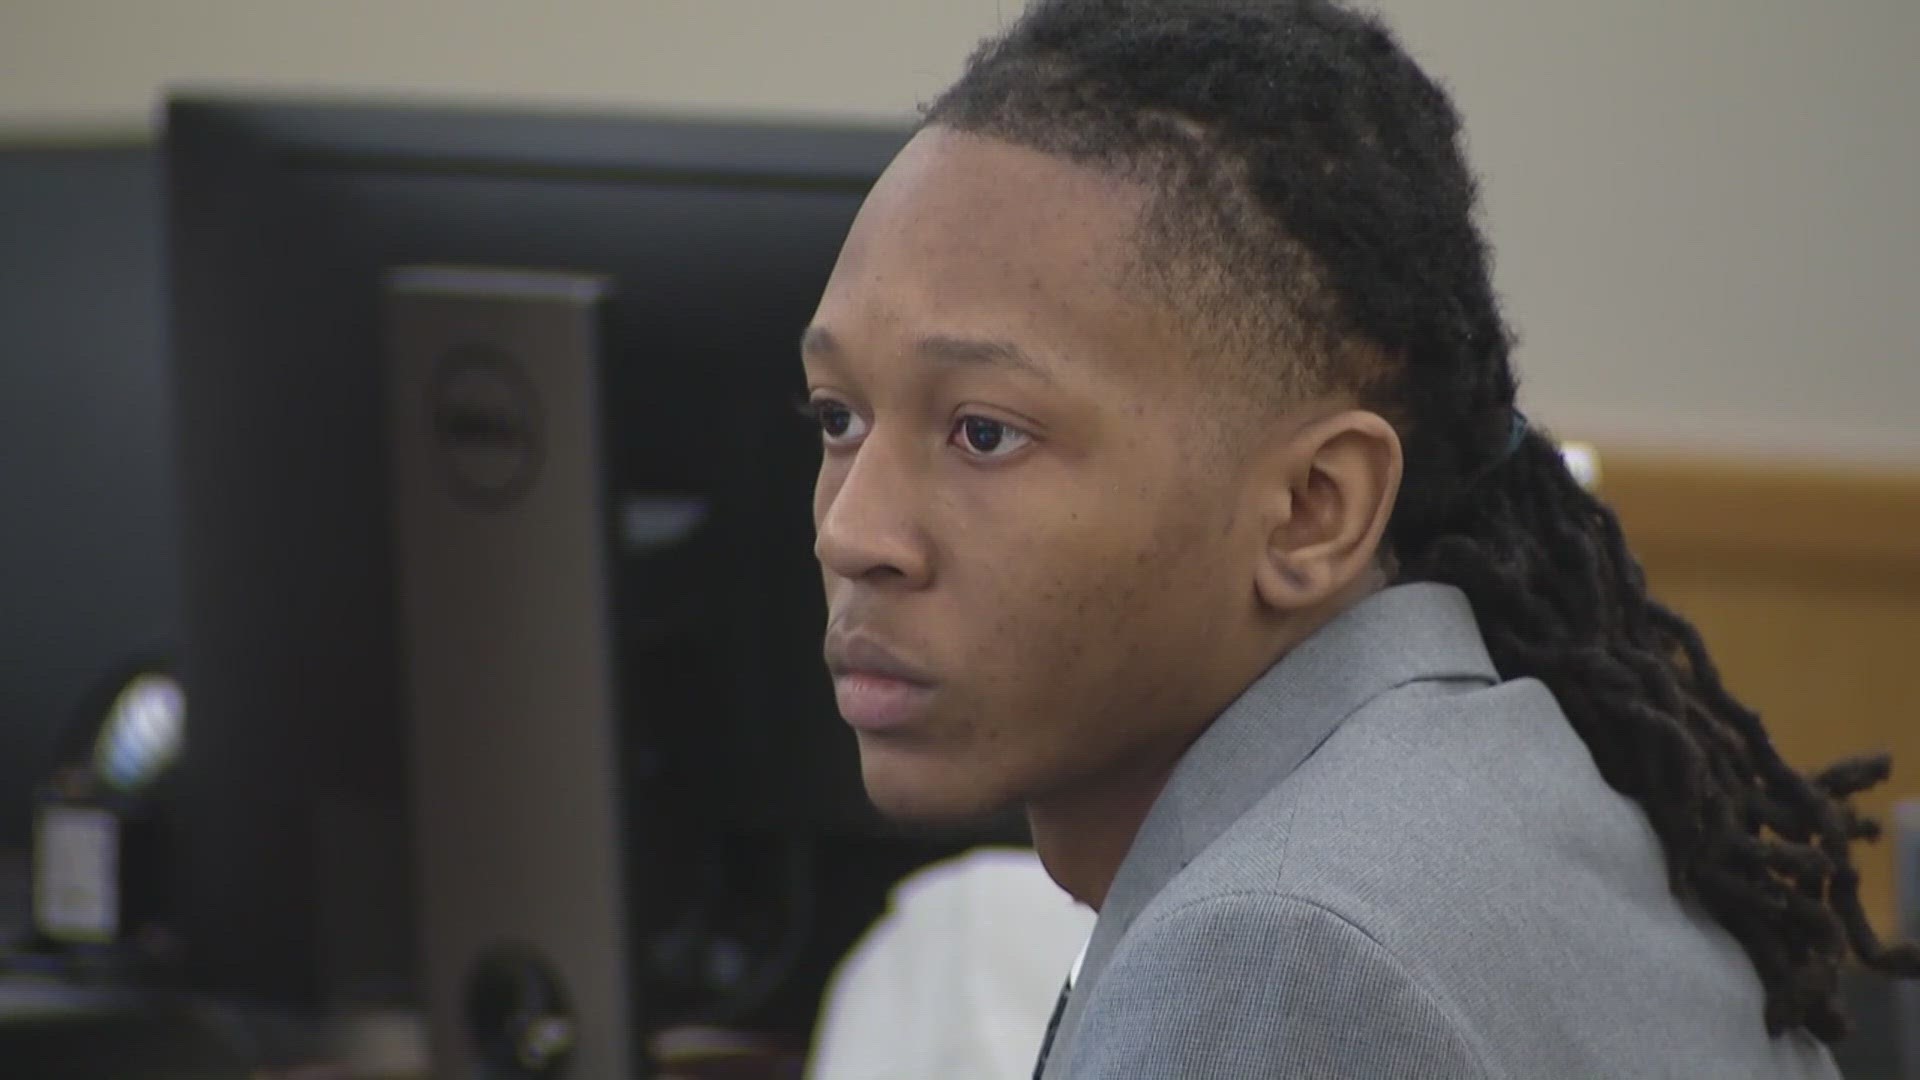 Timothy Simpkins was just 15 years old when he allegedly shot three people at Timberview High School in 2021.